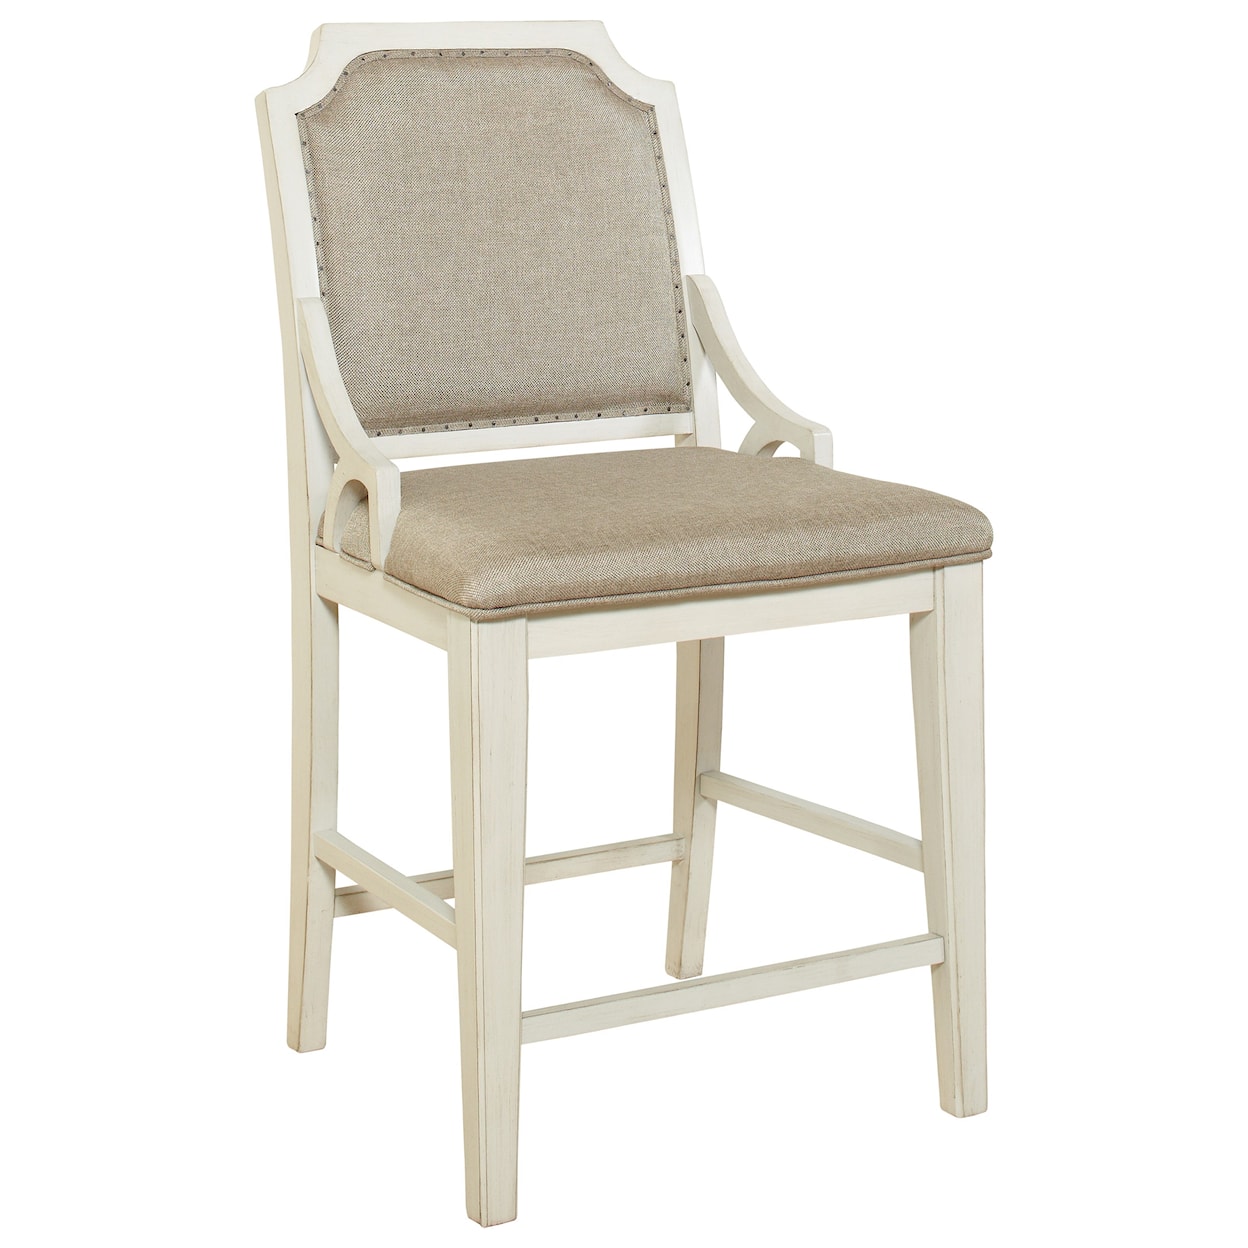 Avalon Furniture Mystic Cay Gathering Chair